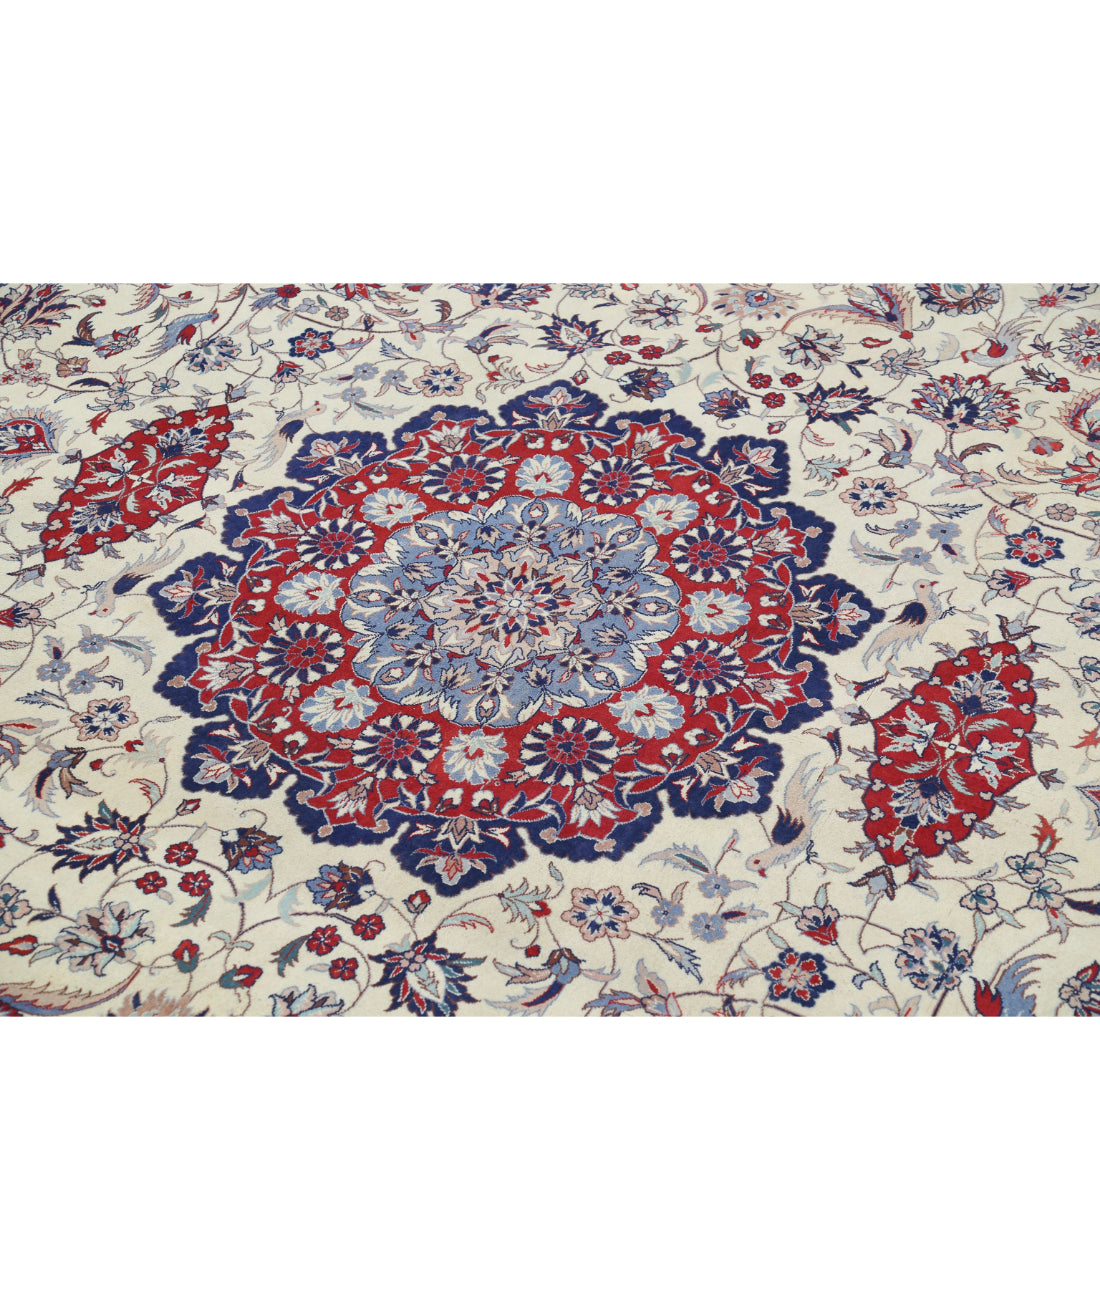 Hand Knotted Heritage Fine Persian Style Wool Rug - 8'4'' x 9'11'' 8'4'' x 9'11'' (250 X 298) / Ivory / Red